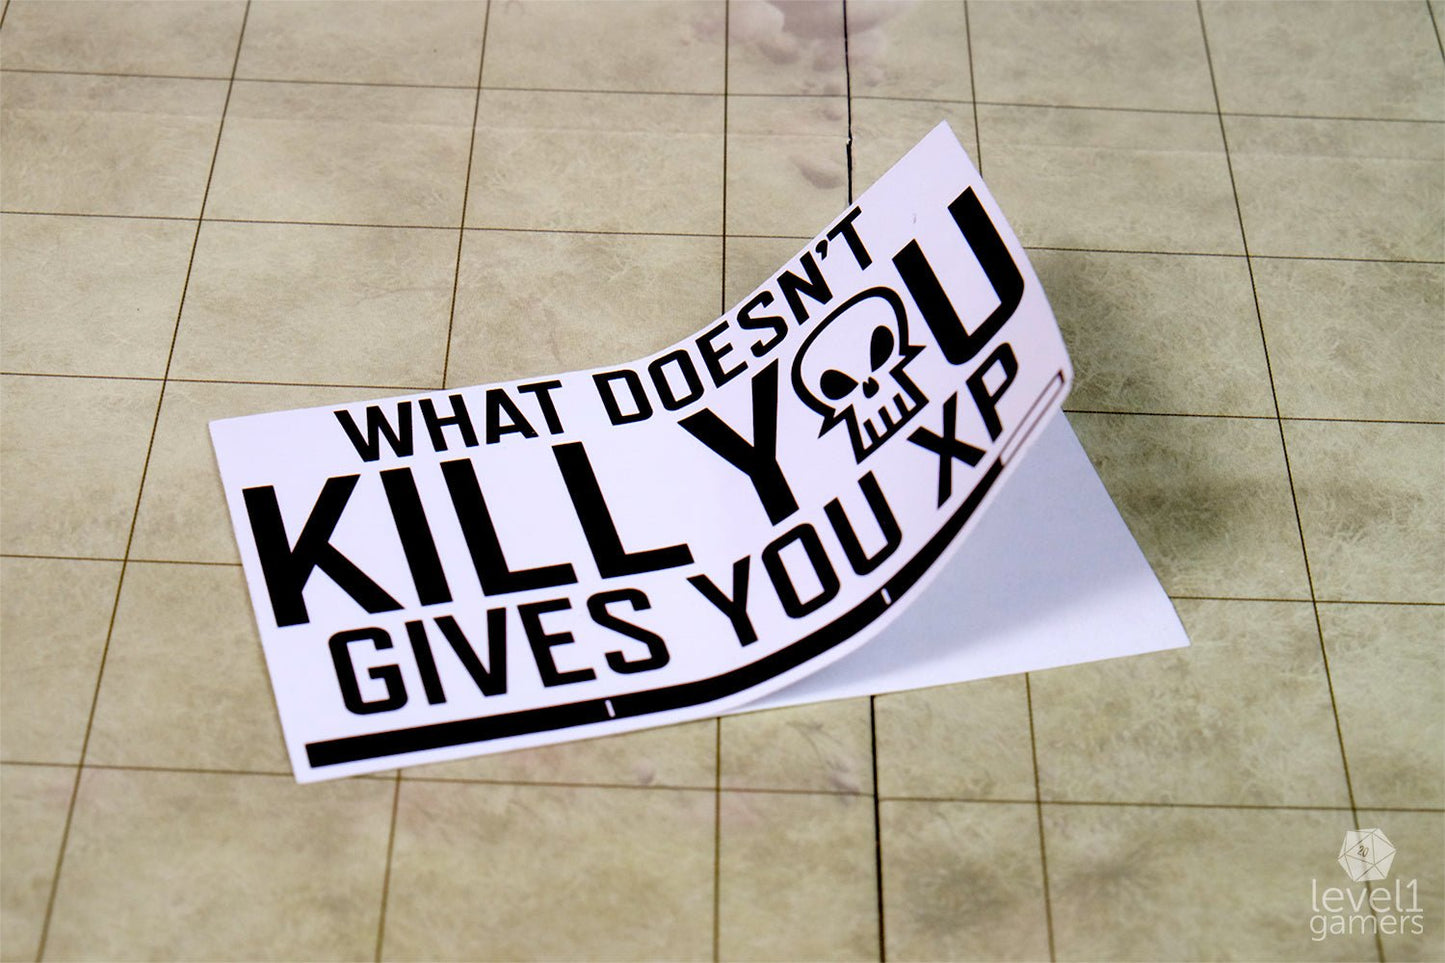 What Doesn't Kill You Gives You XP Sticker  Level 1 Gamers   